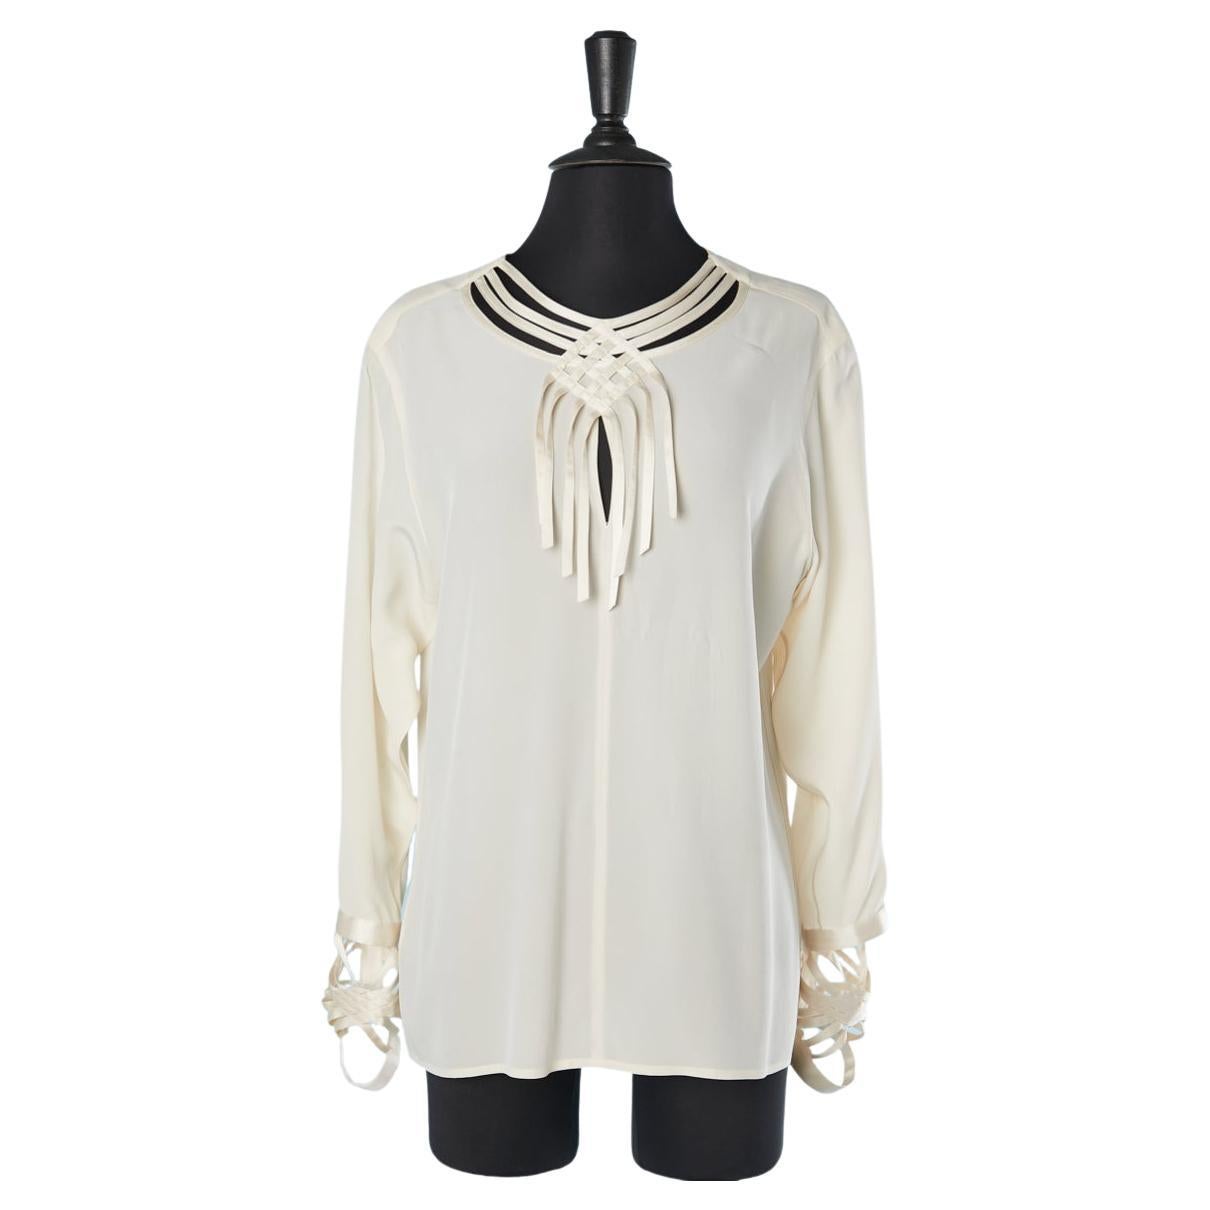 Off-white silk blouse with cut-work on the neck-line and cuffs Karl Lagerfeld  For Sale